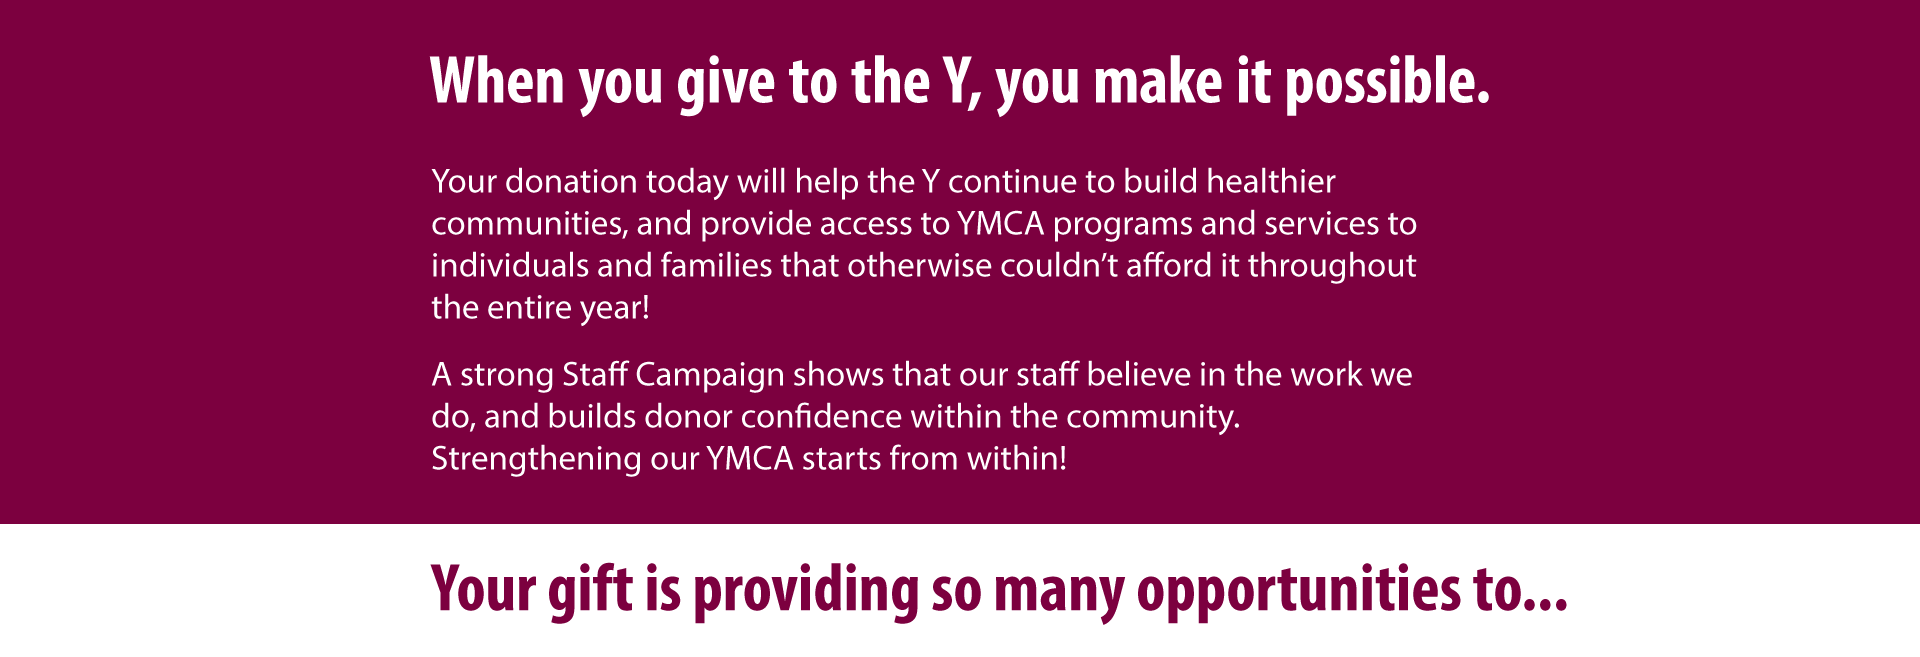 When you give to the Y, you make it possible.